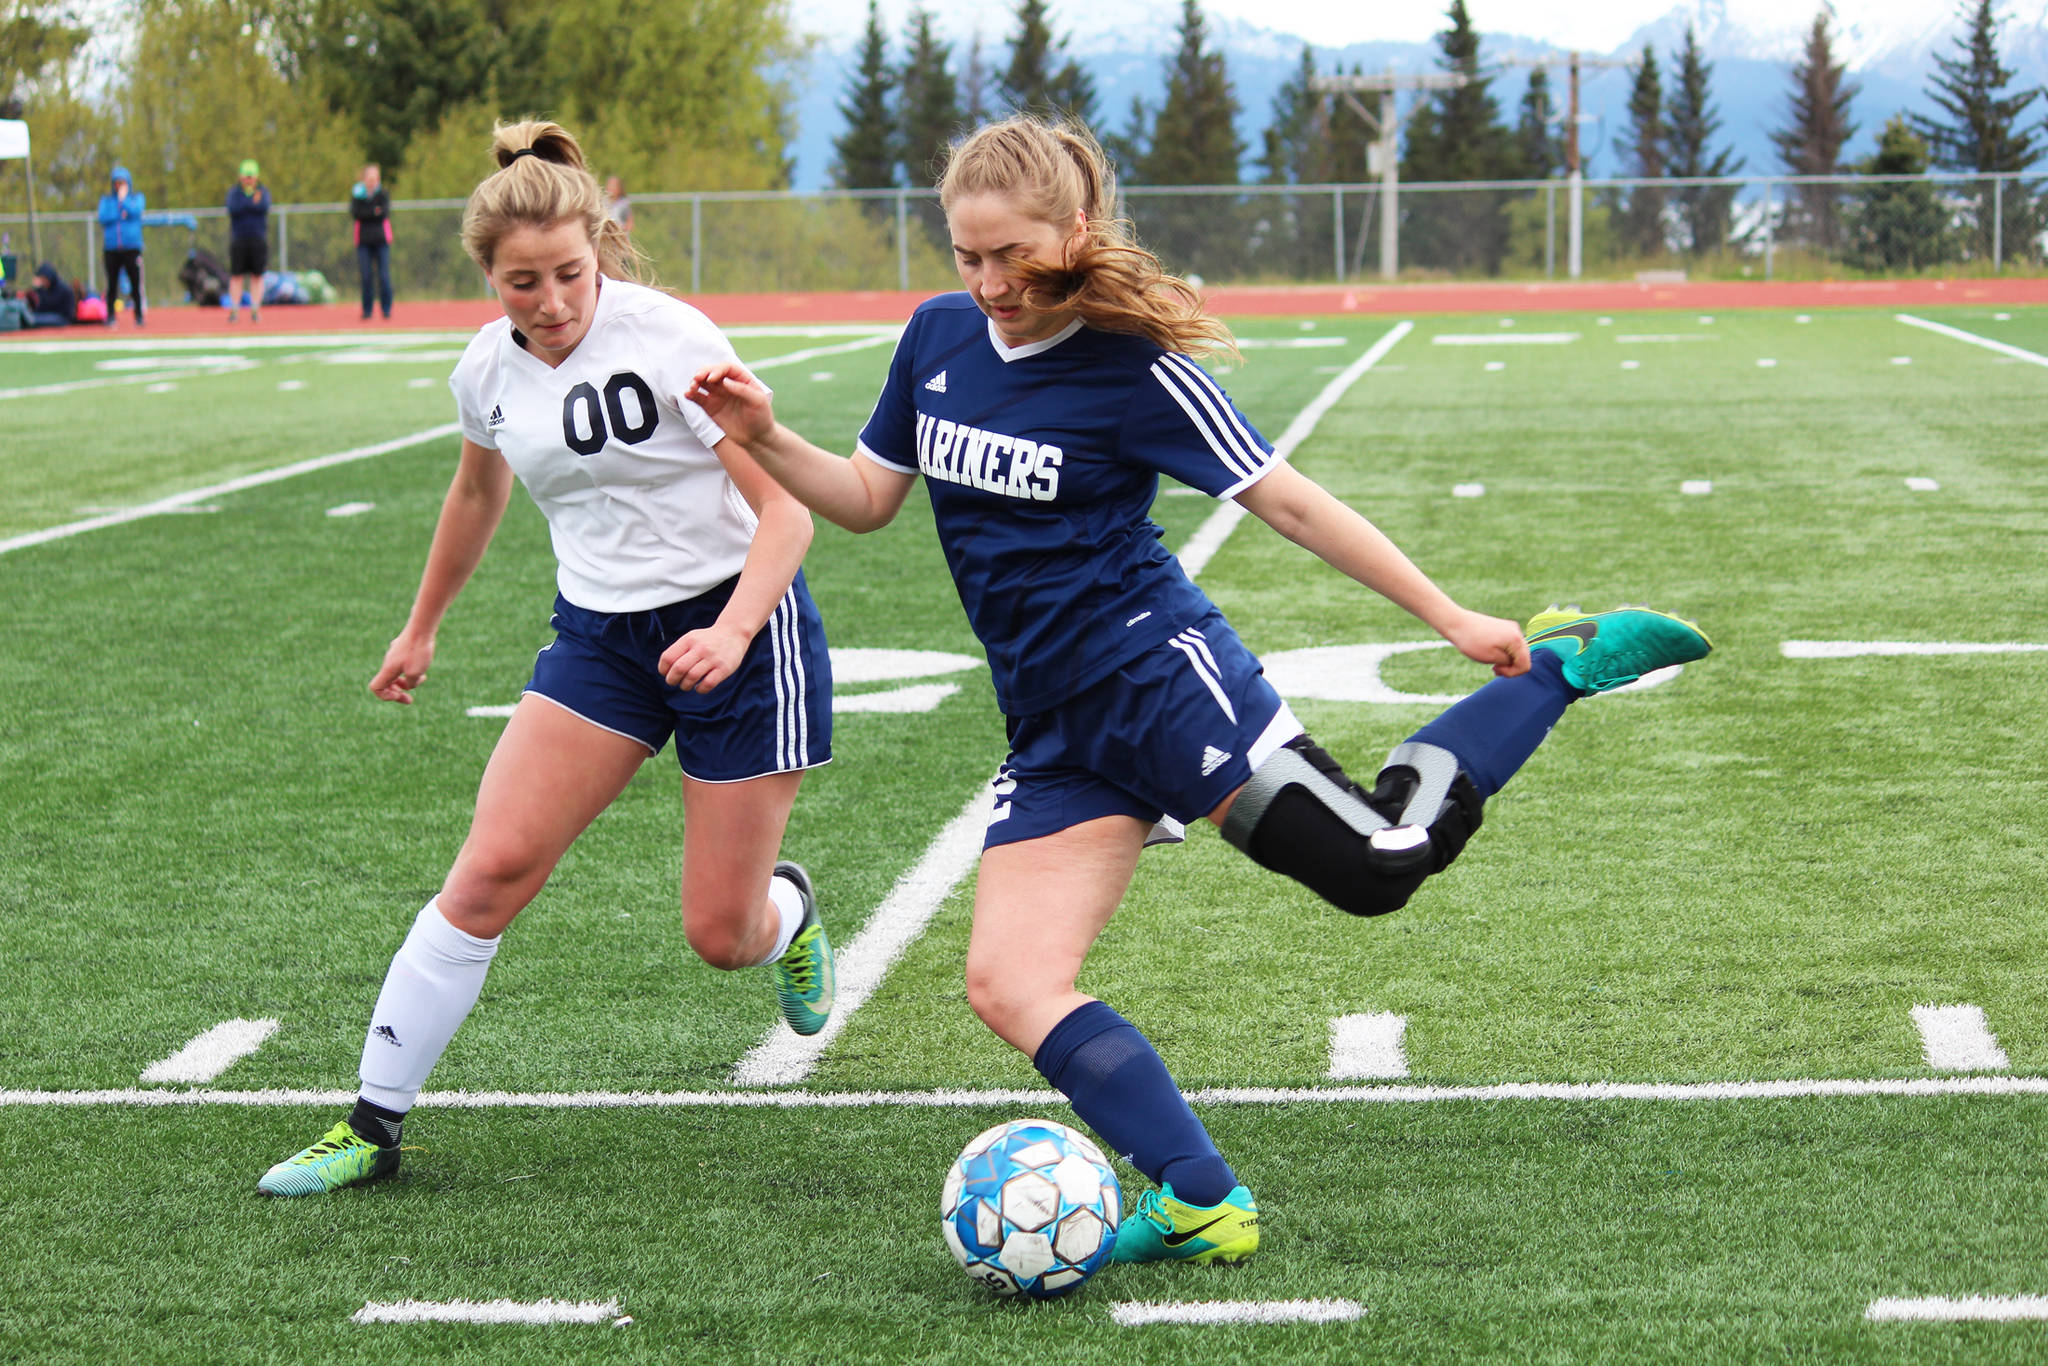 Homer’s Brenna McCarron (right) prepares to send the ball up the field under pressure from Soldotna’s Ryann Cannava during the girls championship game of the Peninsula Conference soccer tournament on Saturday at Homer High School in Homer. (Photo by Megan Pacer/Homer News)